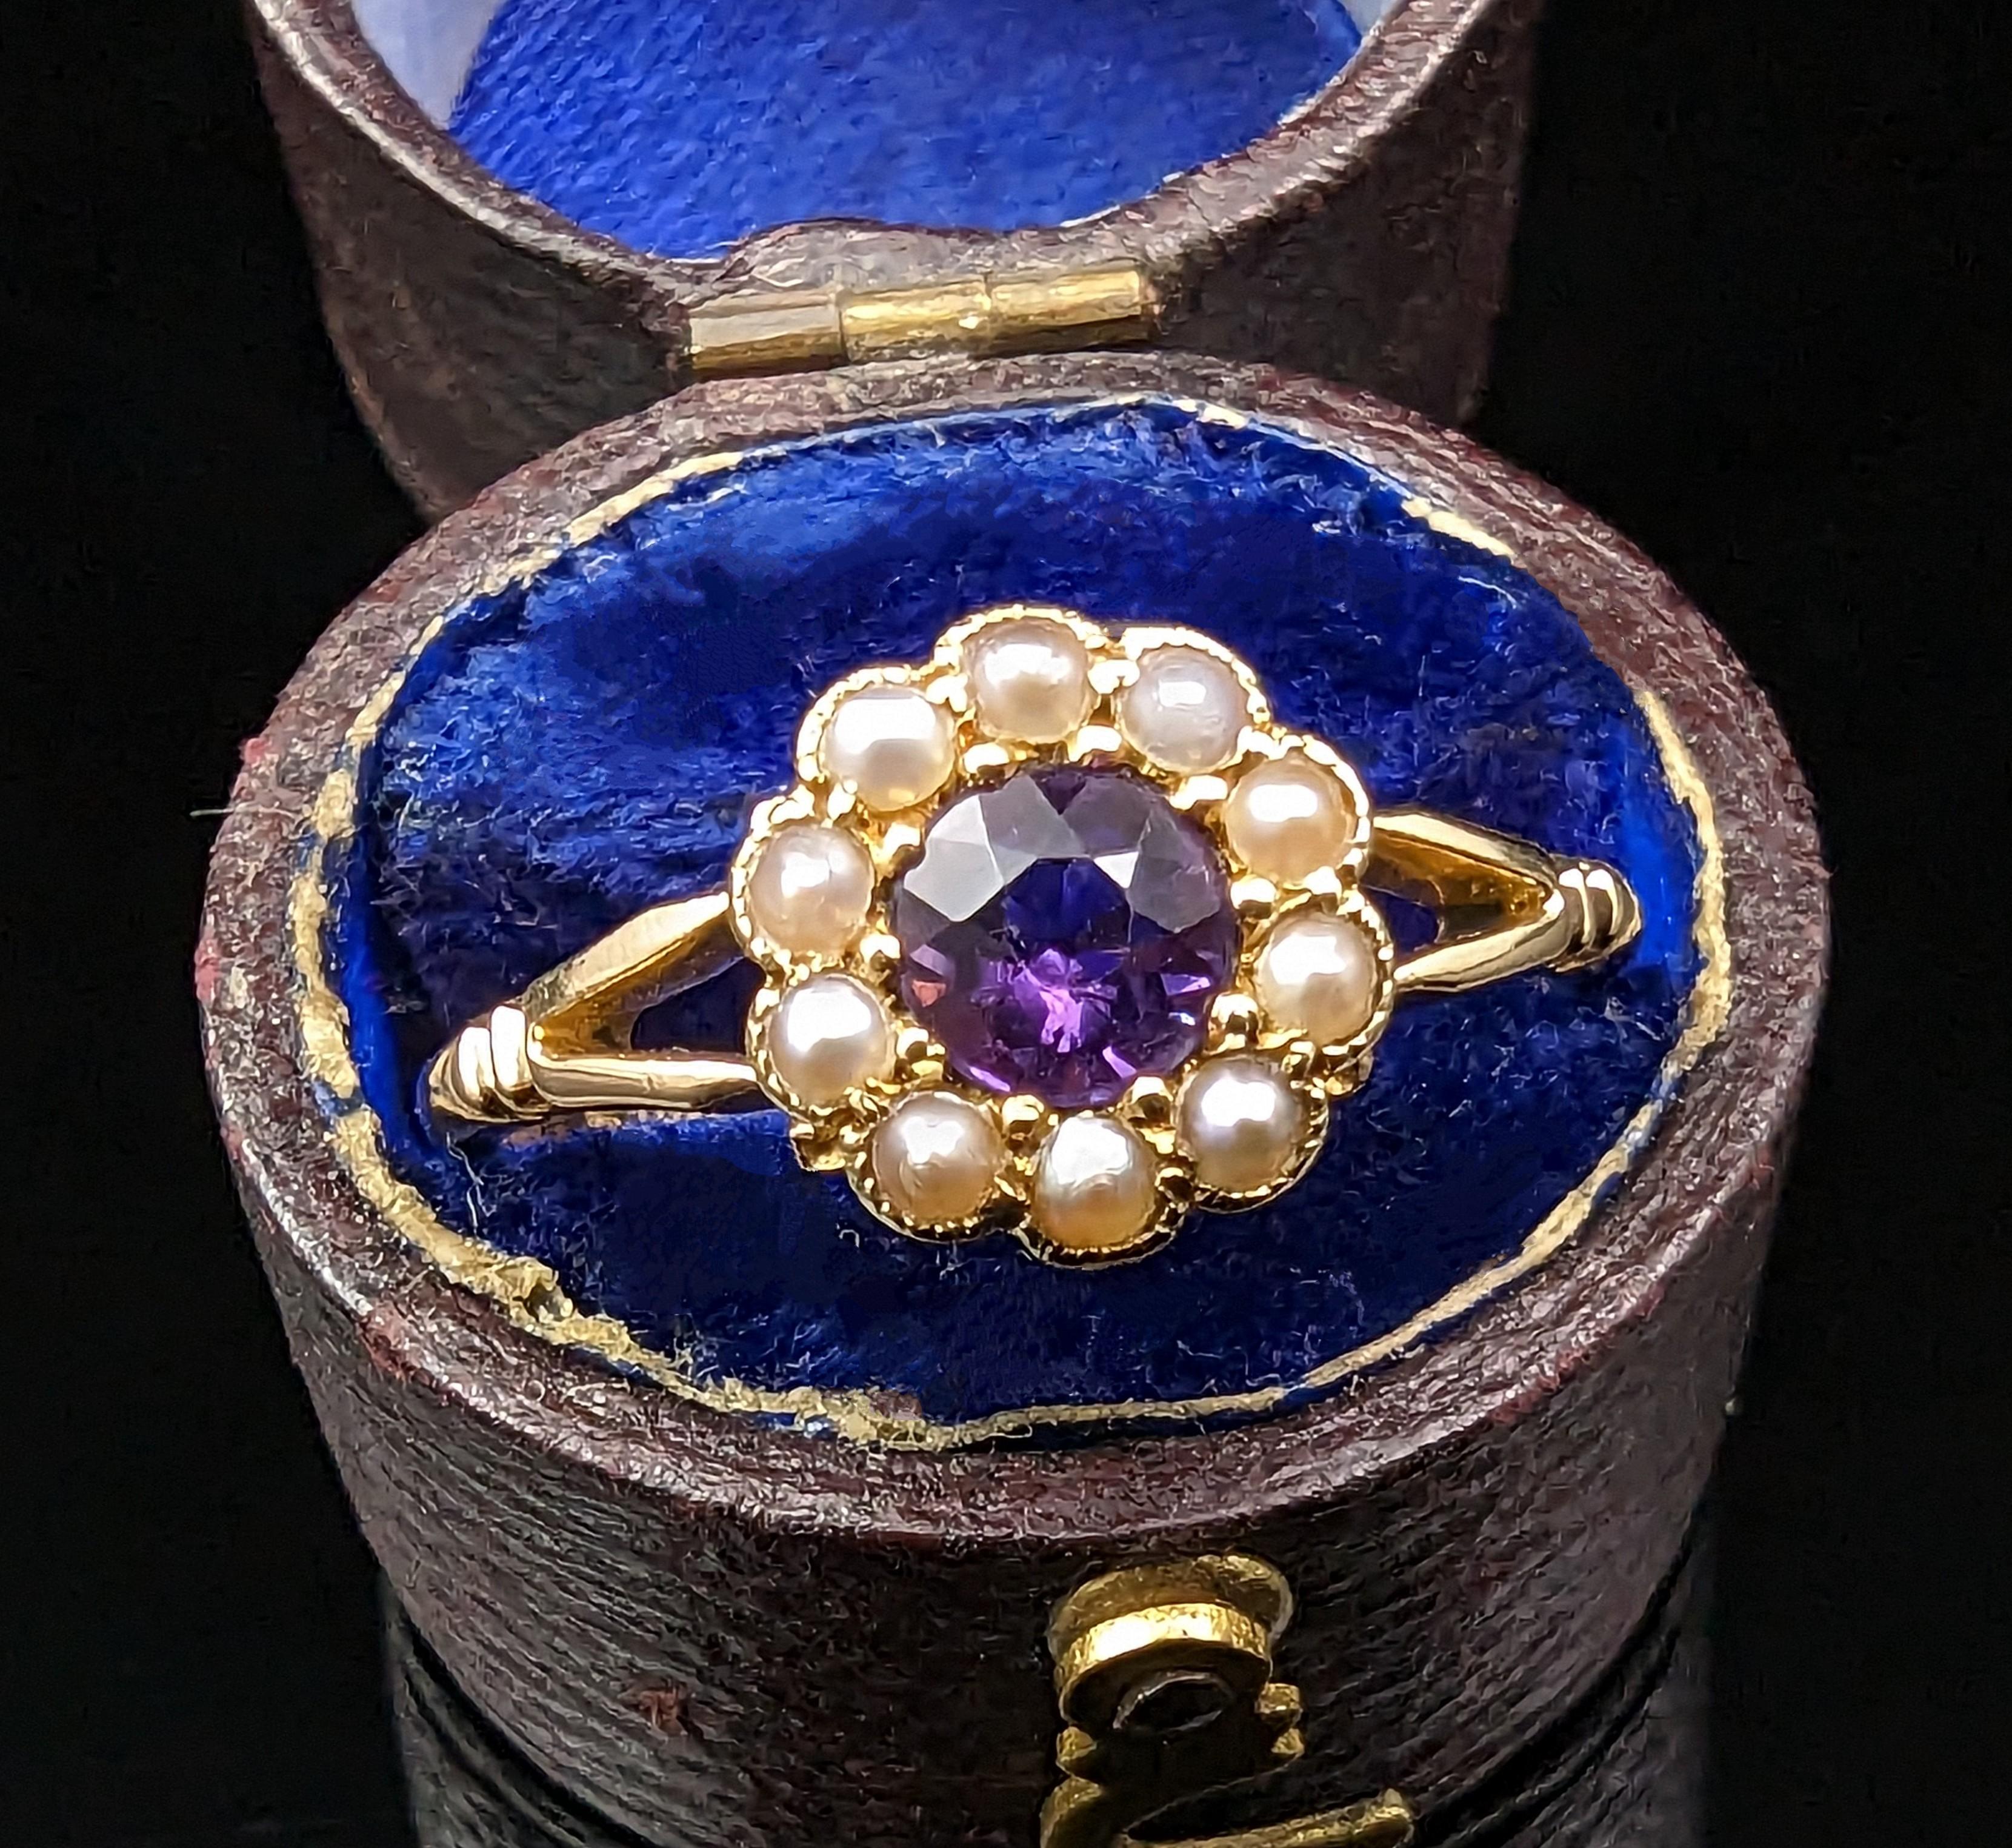 This pretty antique Amethyst and seed pearl cluster ring is delicately charming and oh so sweet.

We love it's soft floral design and vibrant lush amethyst, set to the centre and surrounded by a halo of creamy seed pearls.

The ring is crafted in